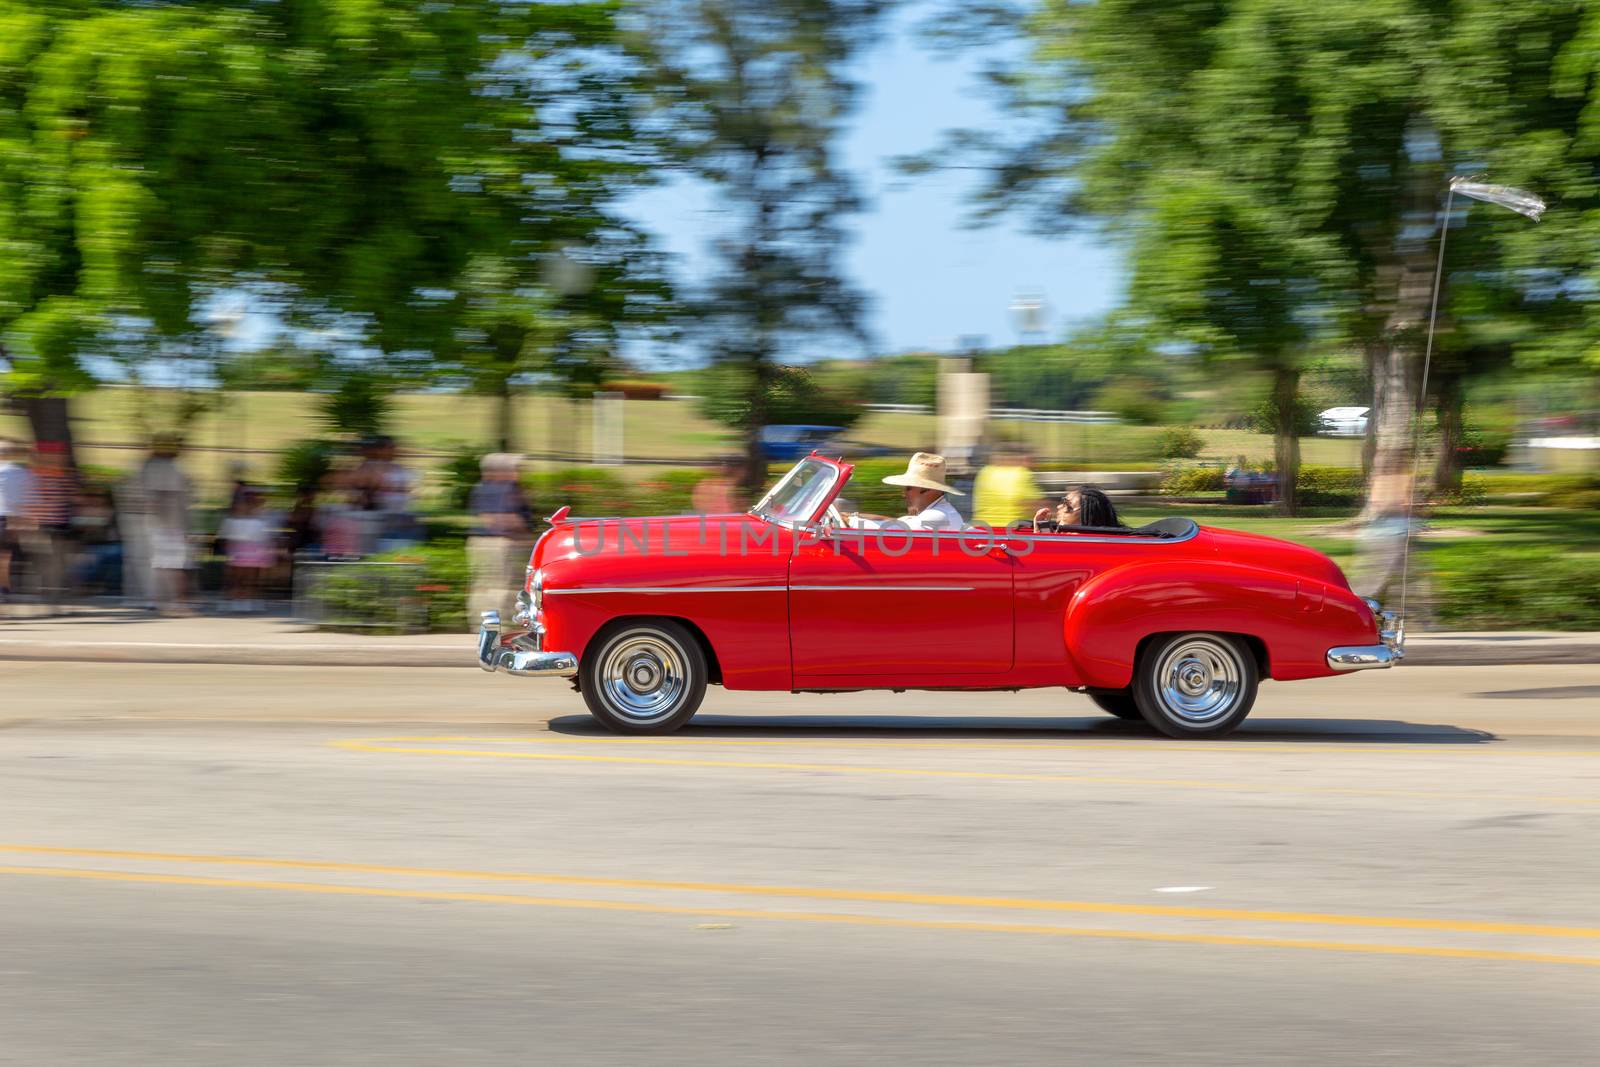 HAVANA, CUBA - CIRCA 2017: Panning on an American red classic car in the streets of Havana, transporting tourists. Concept of tourism having fun.